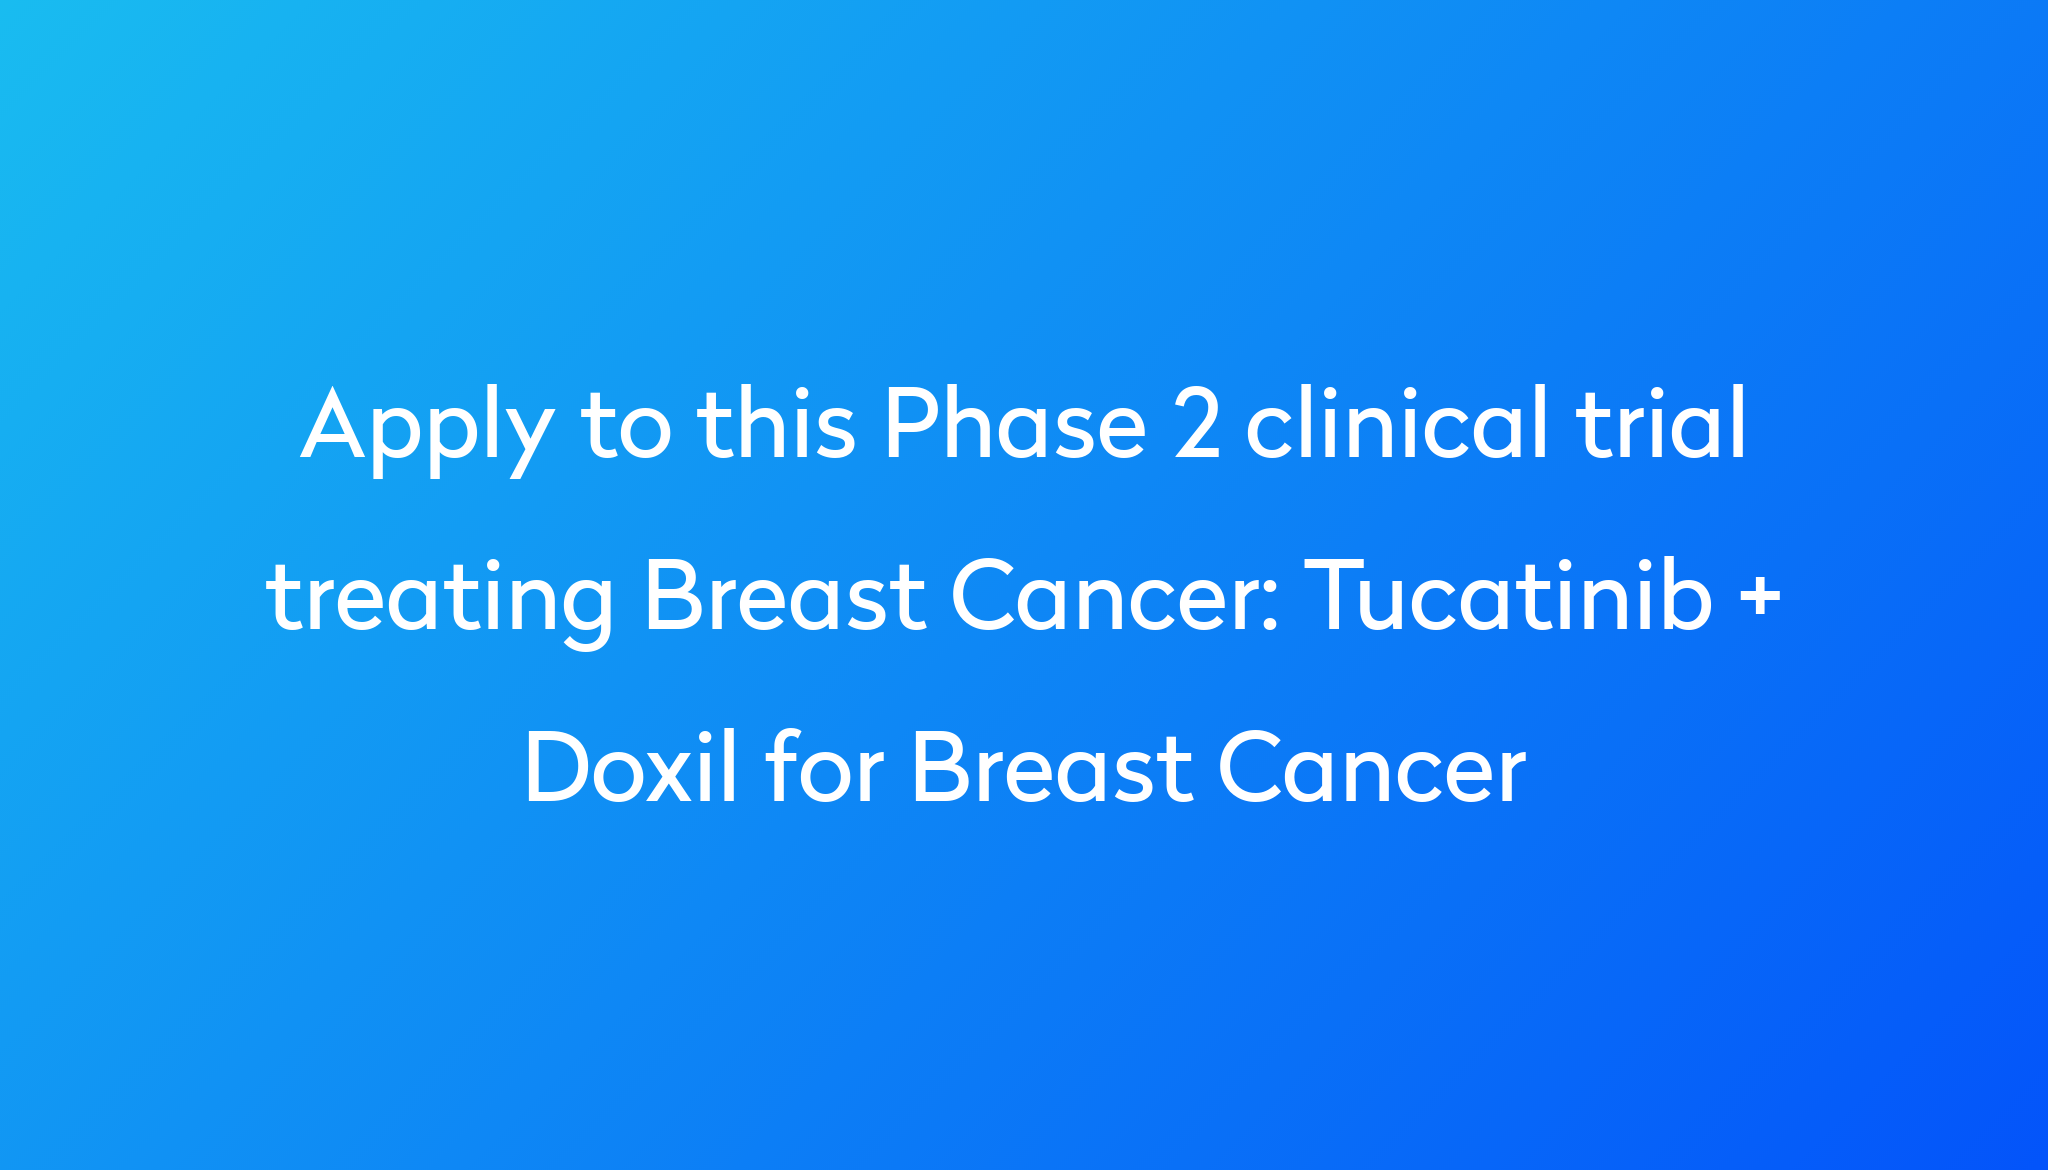 Tucatinib + Doxil for Breast Cancer Clinical Trial 2024 Power